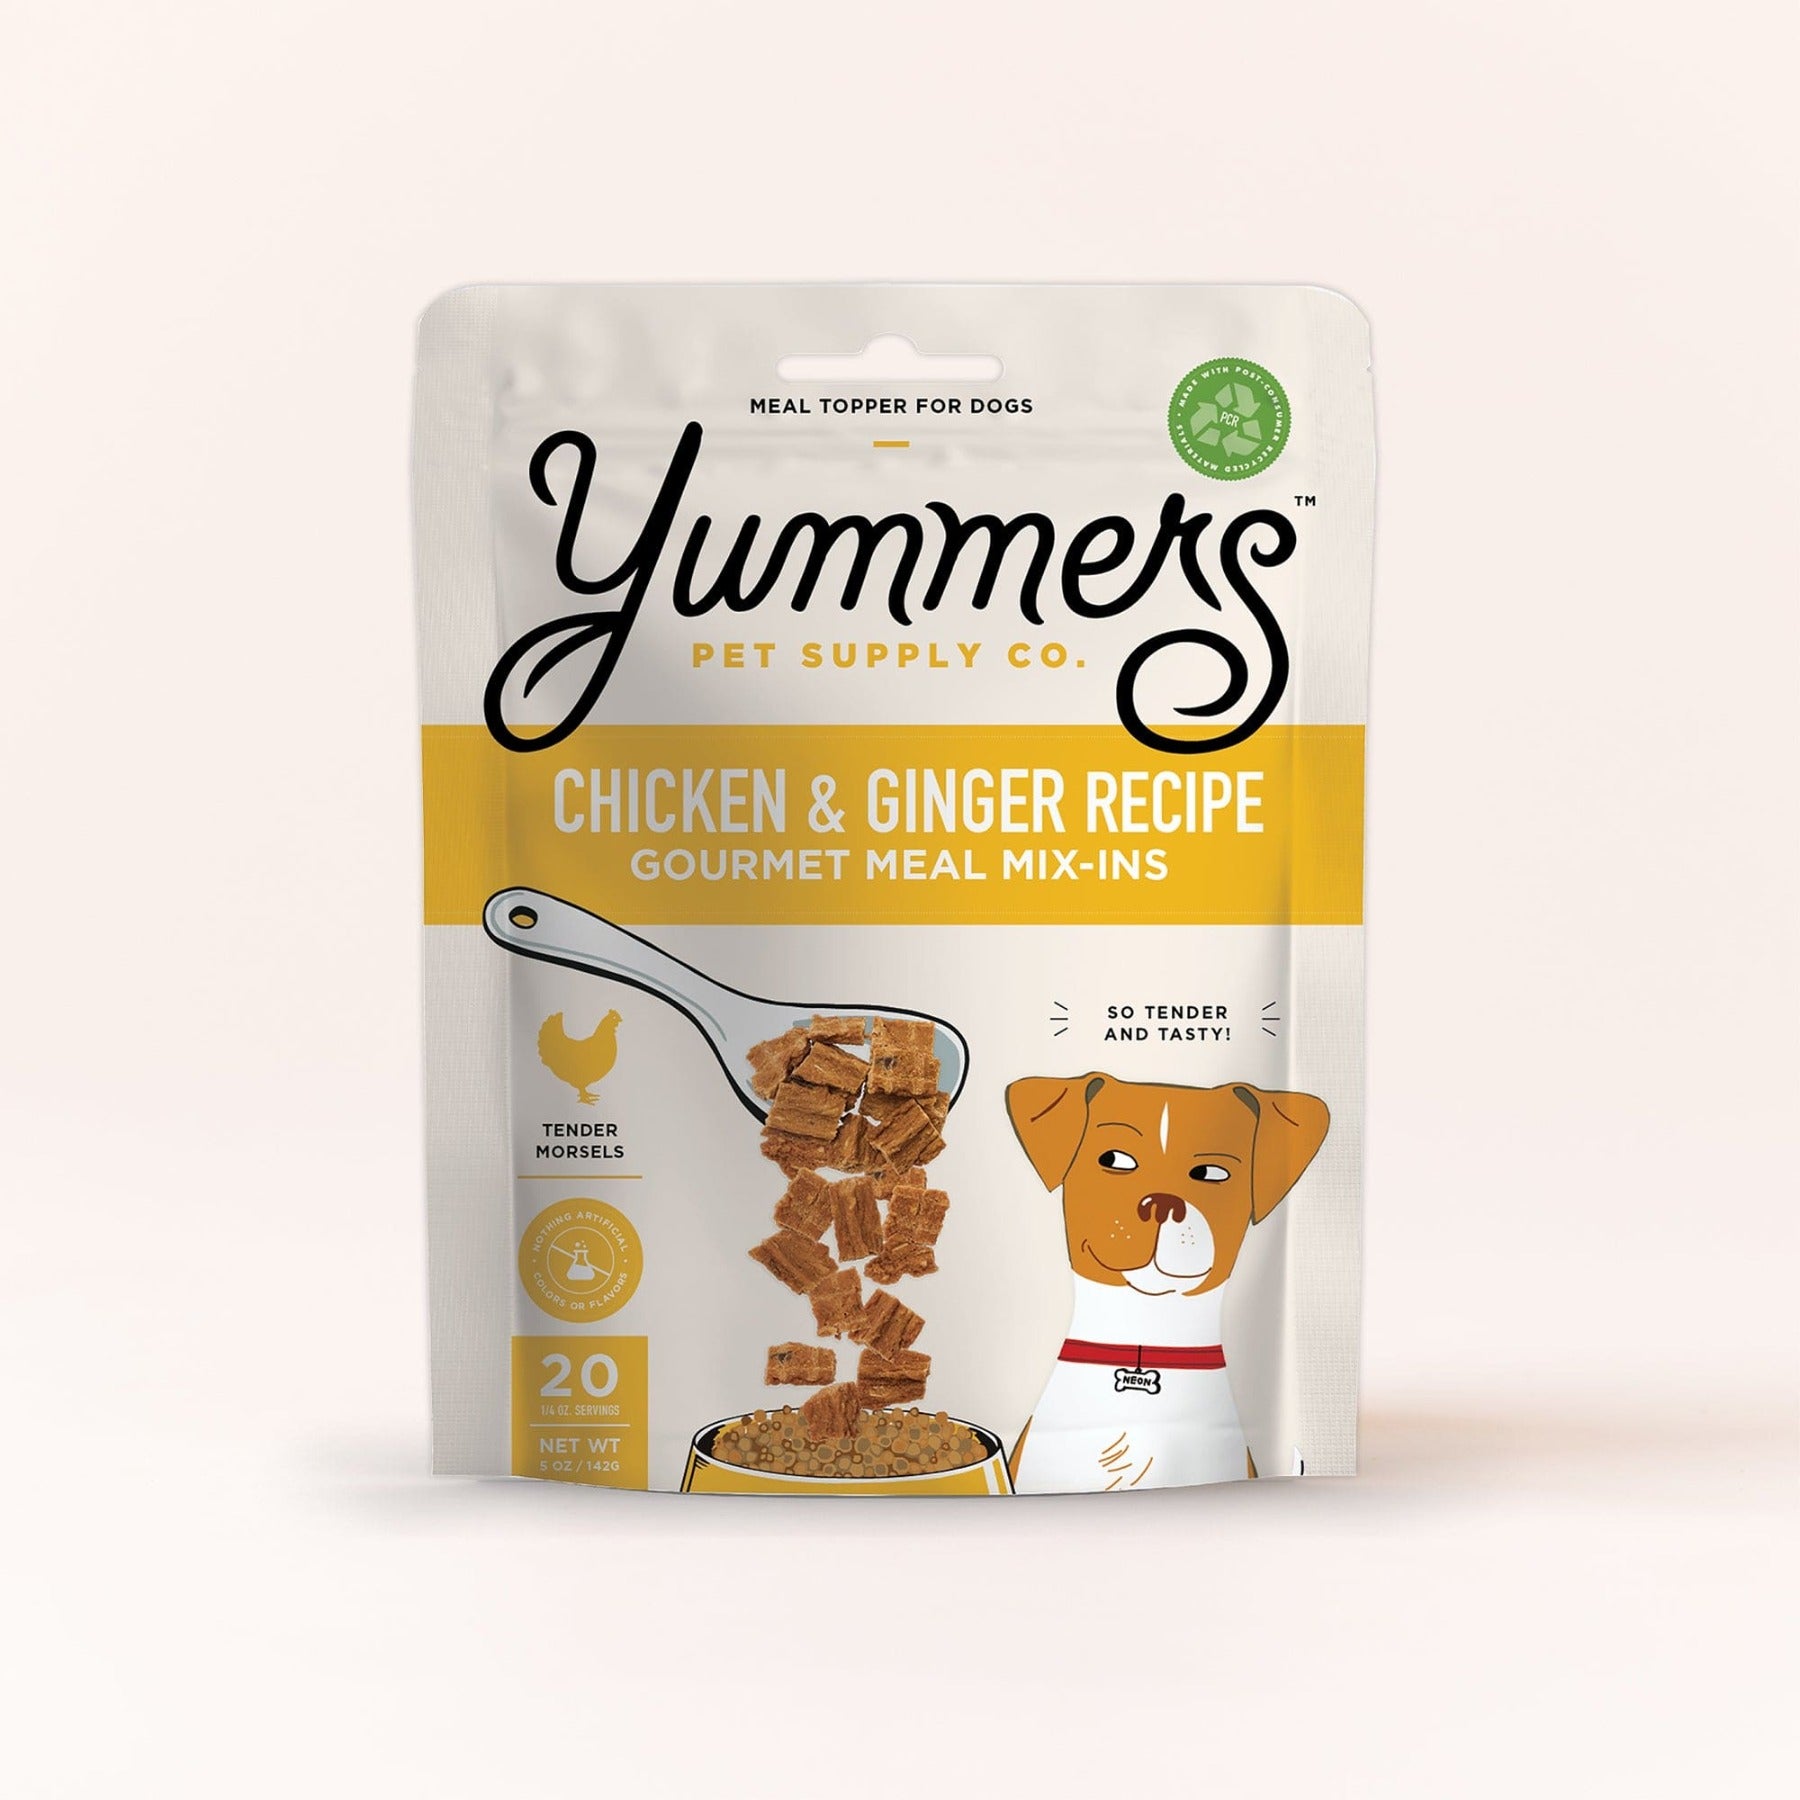 Yummers Chicken & Ginger Meal Mix-Ins